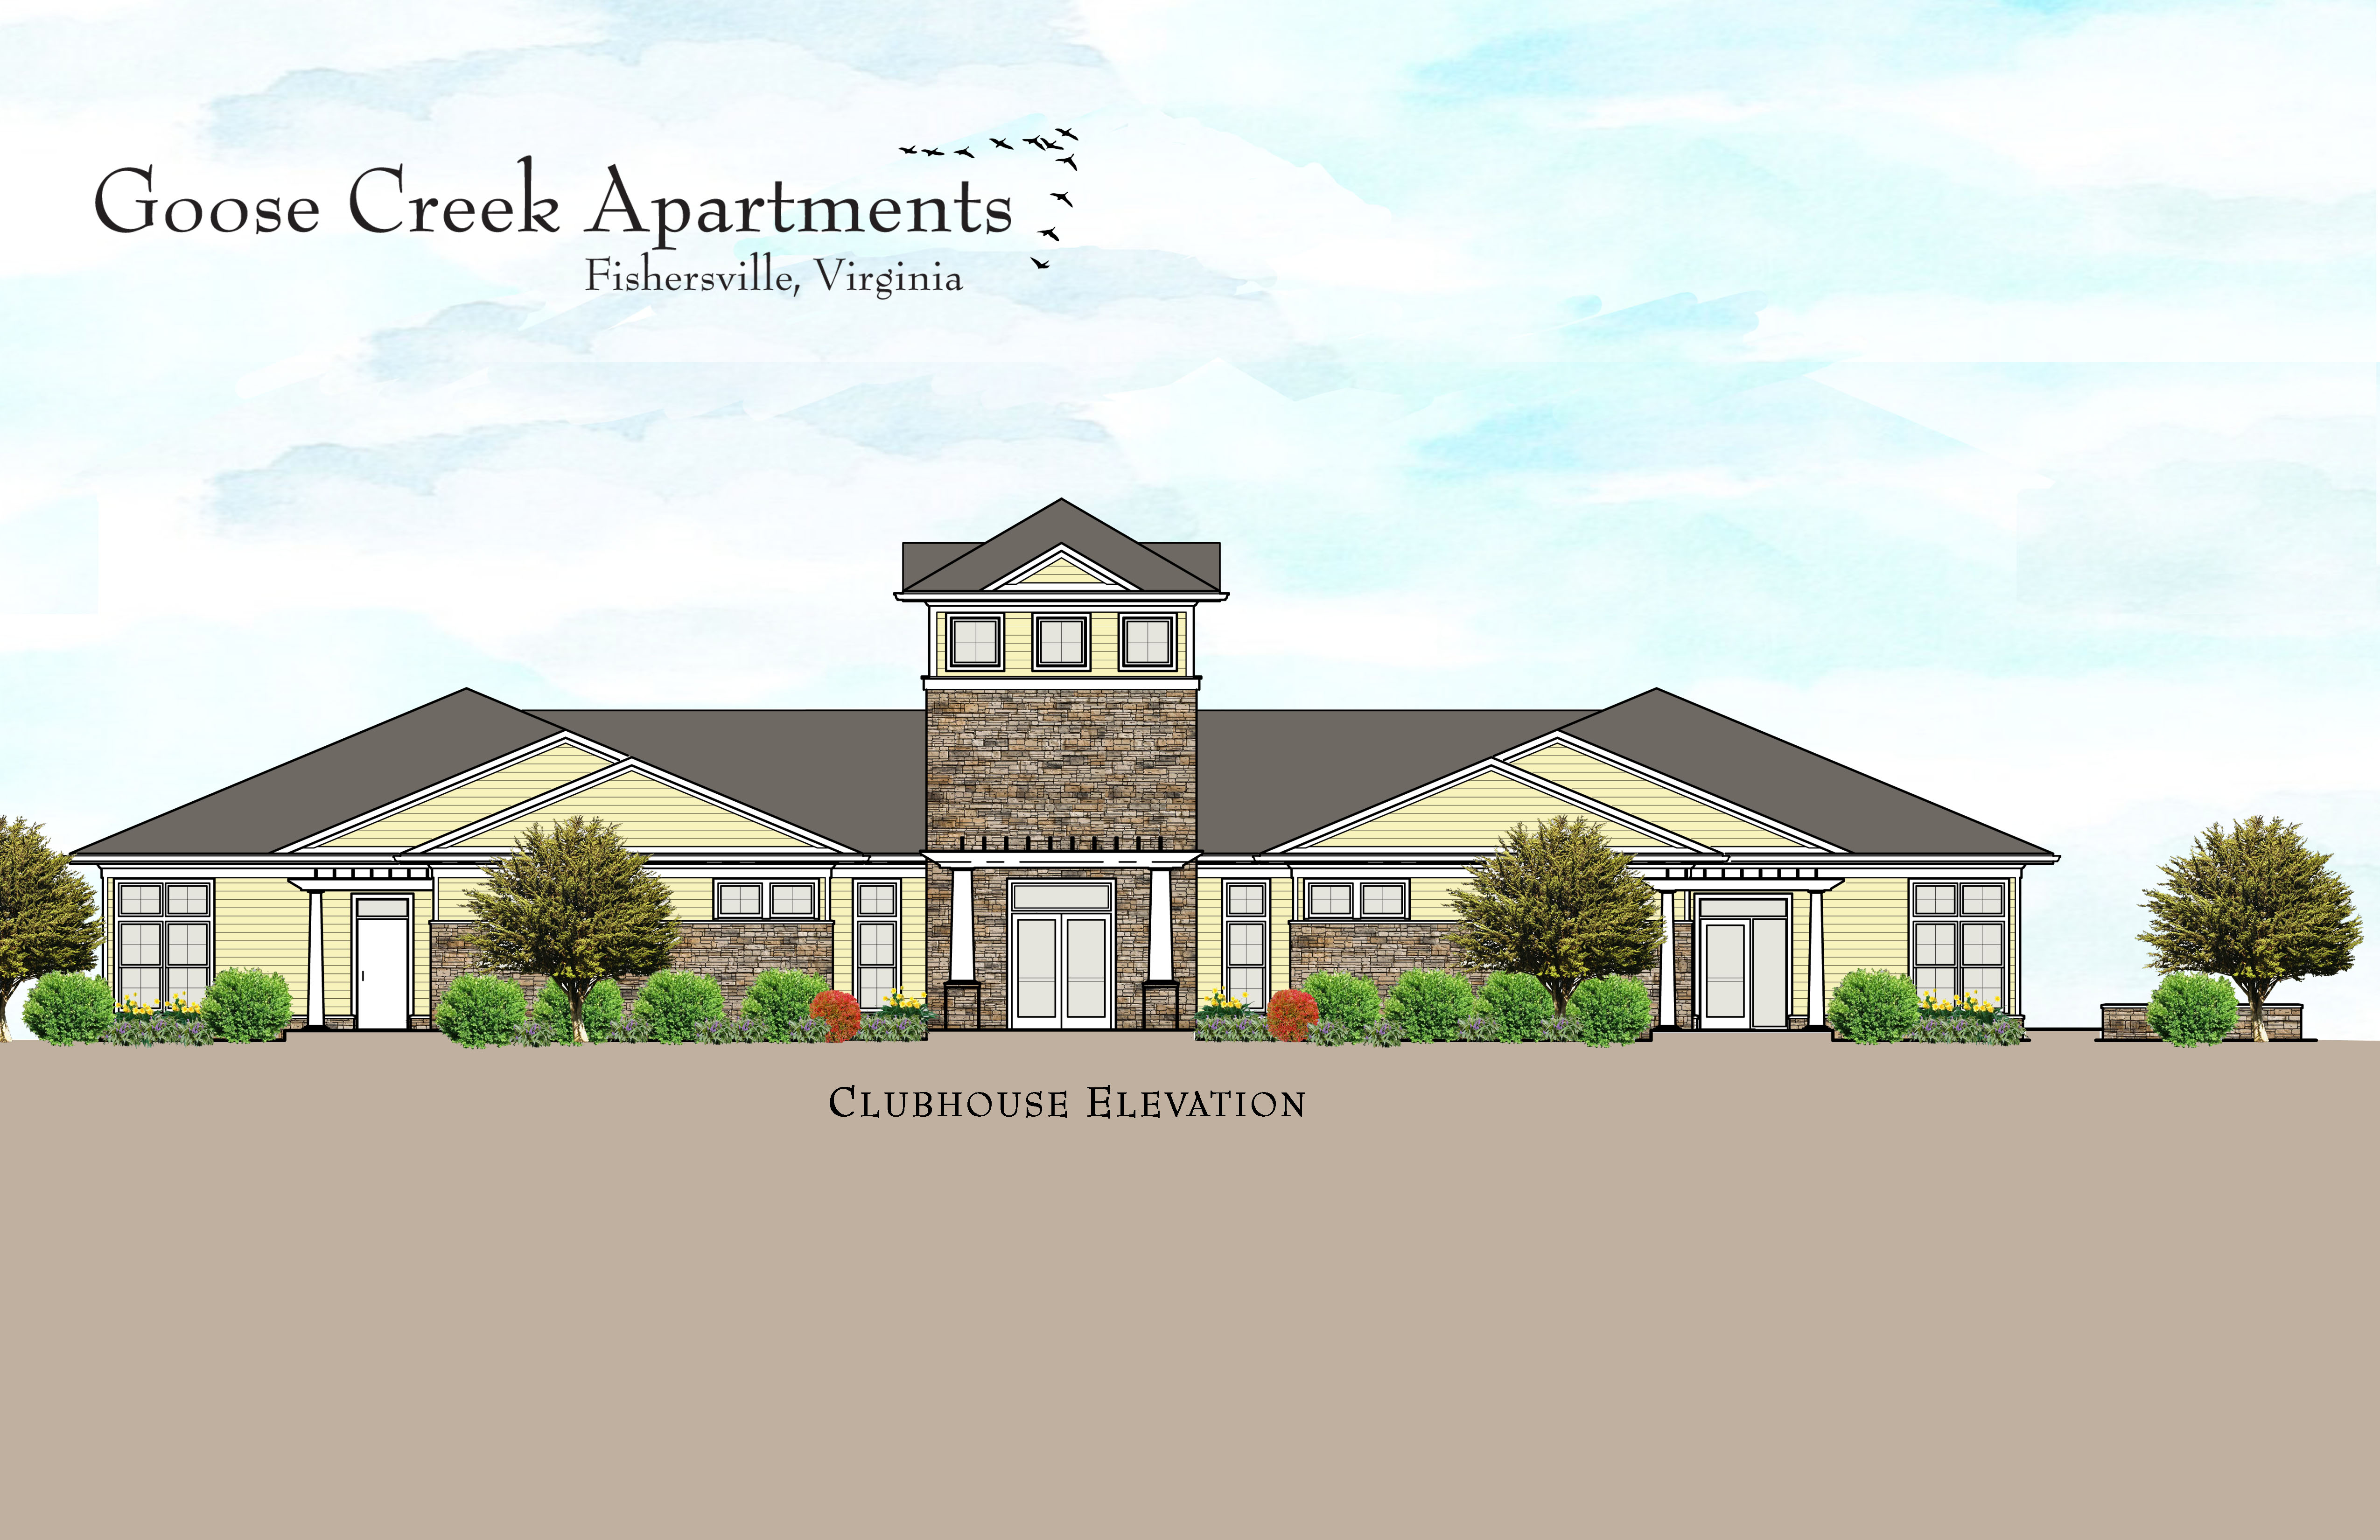 S:2012MasterFolder1233 Goose CreekClubhouse1233 A4 Elevation